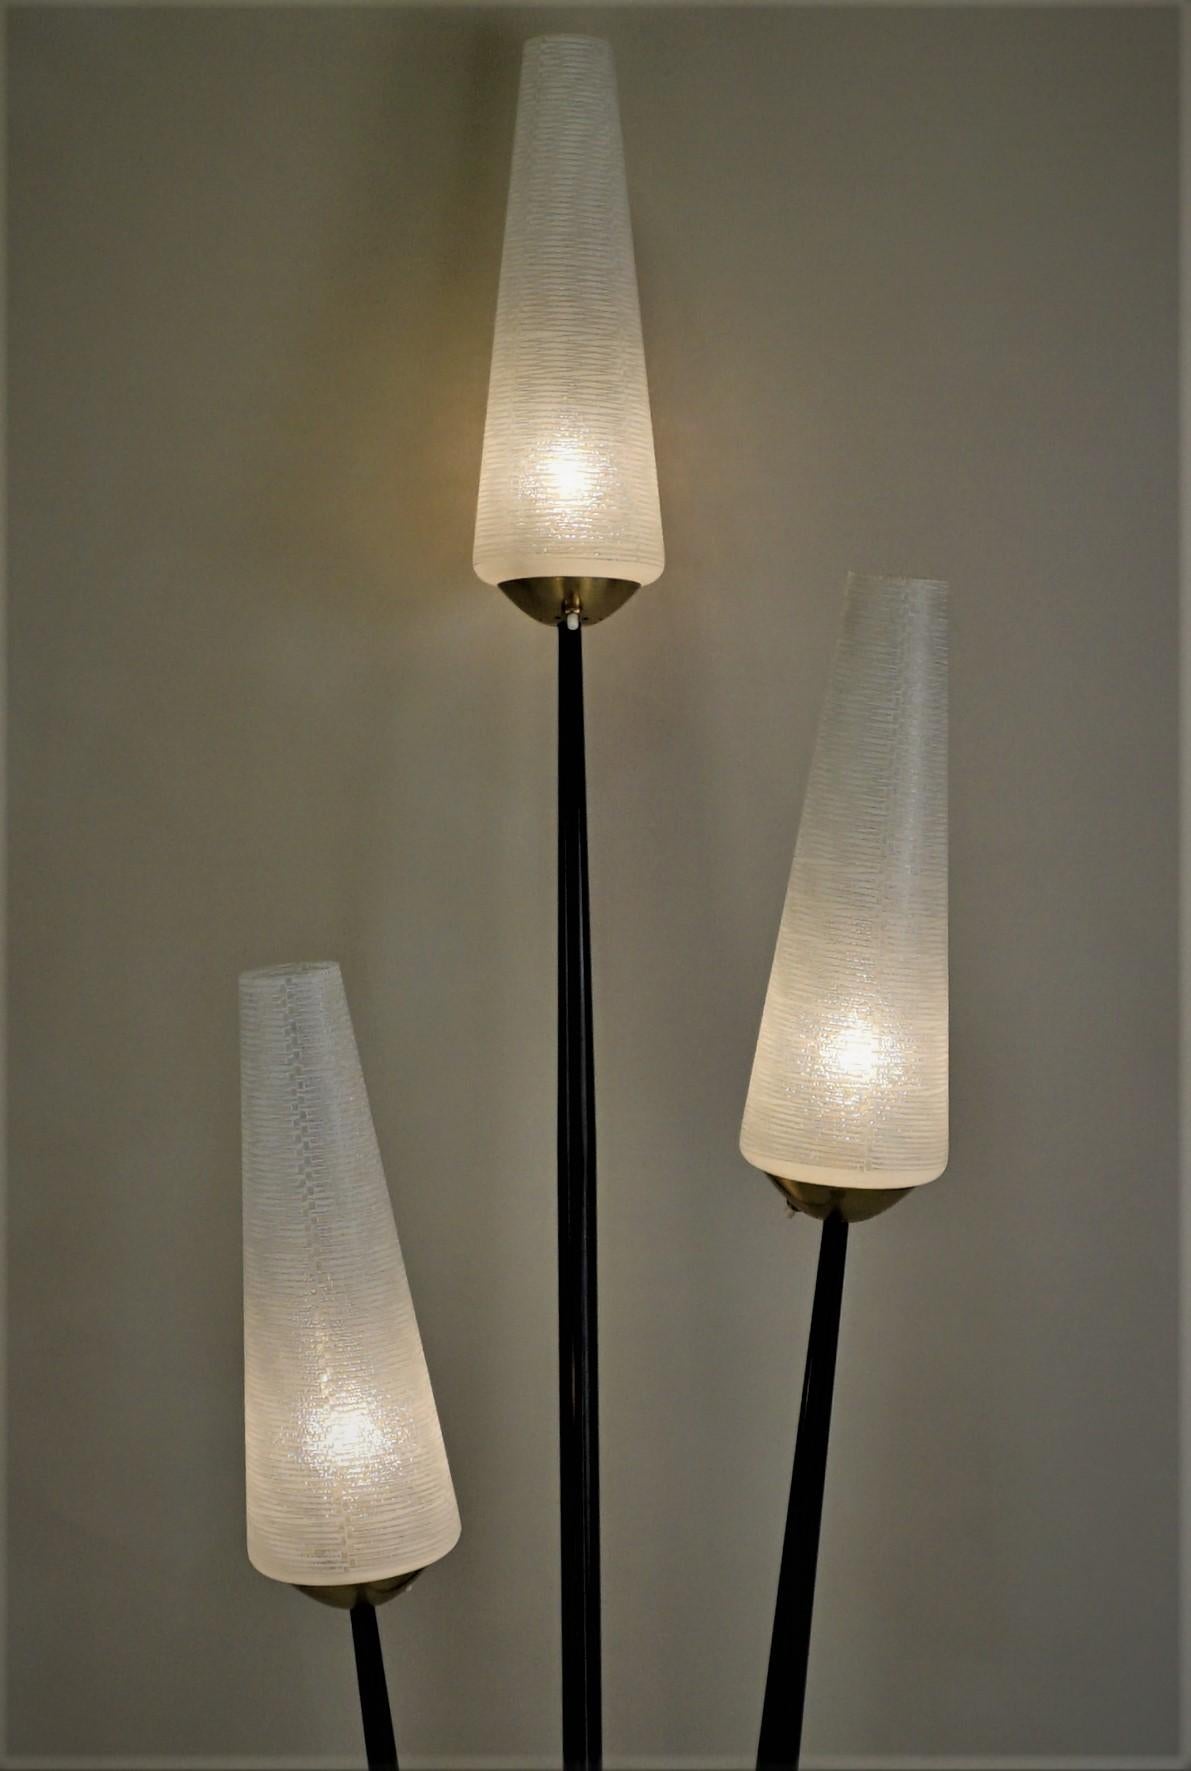 A fabulous midcentury three-light, bronze and black lacquered with textured glass floor lamp.